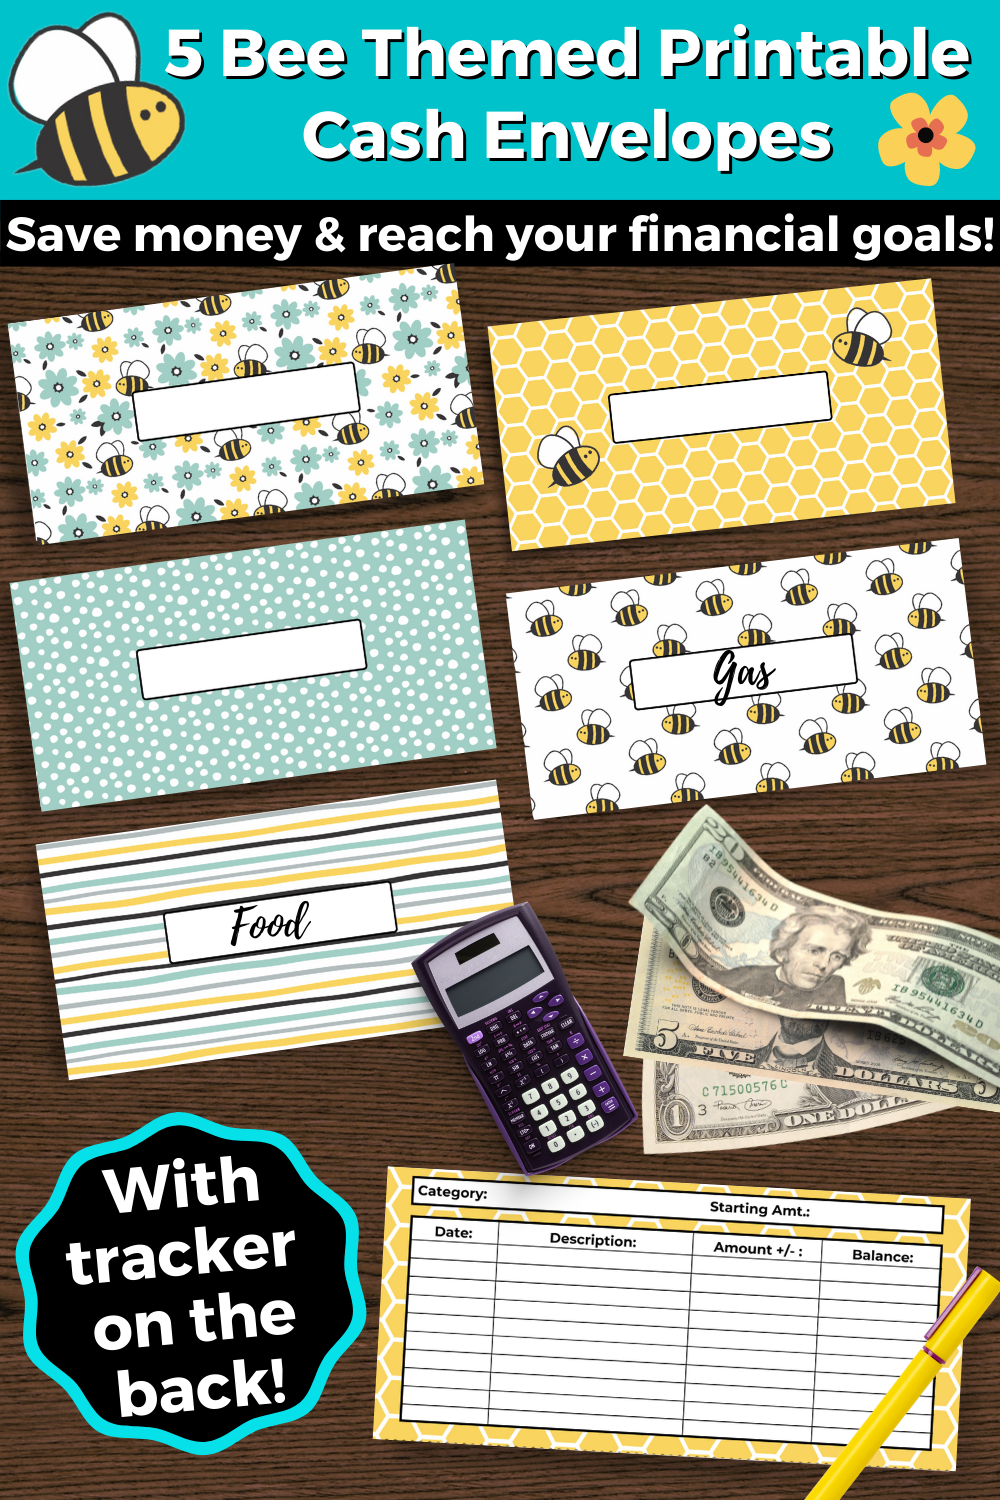 5 Bee Themed Printable Cash Envelopes with Transaction Tracker- For Instant Download